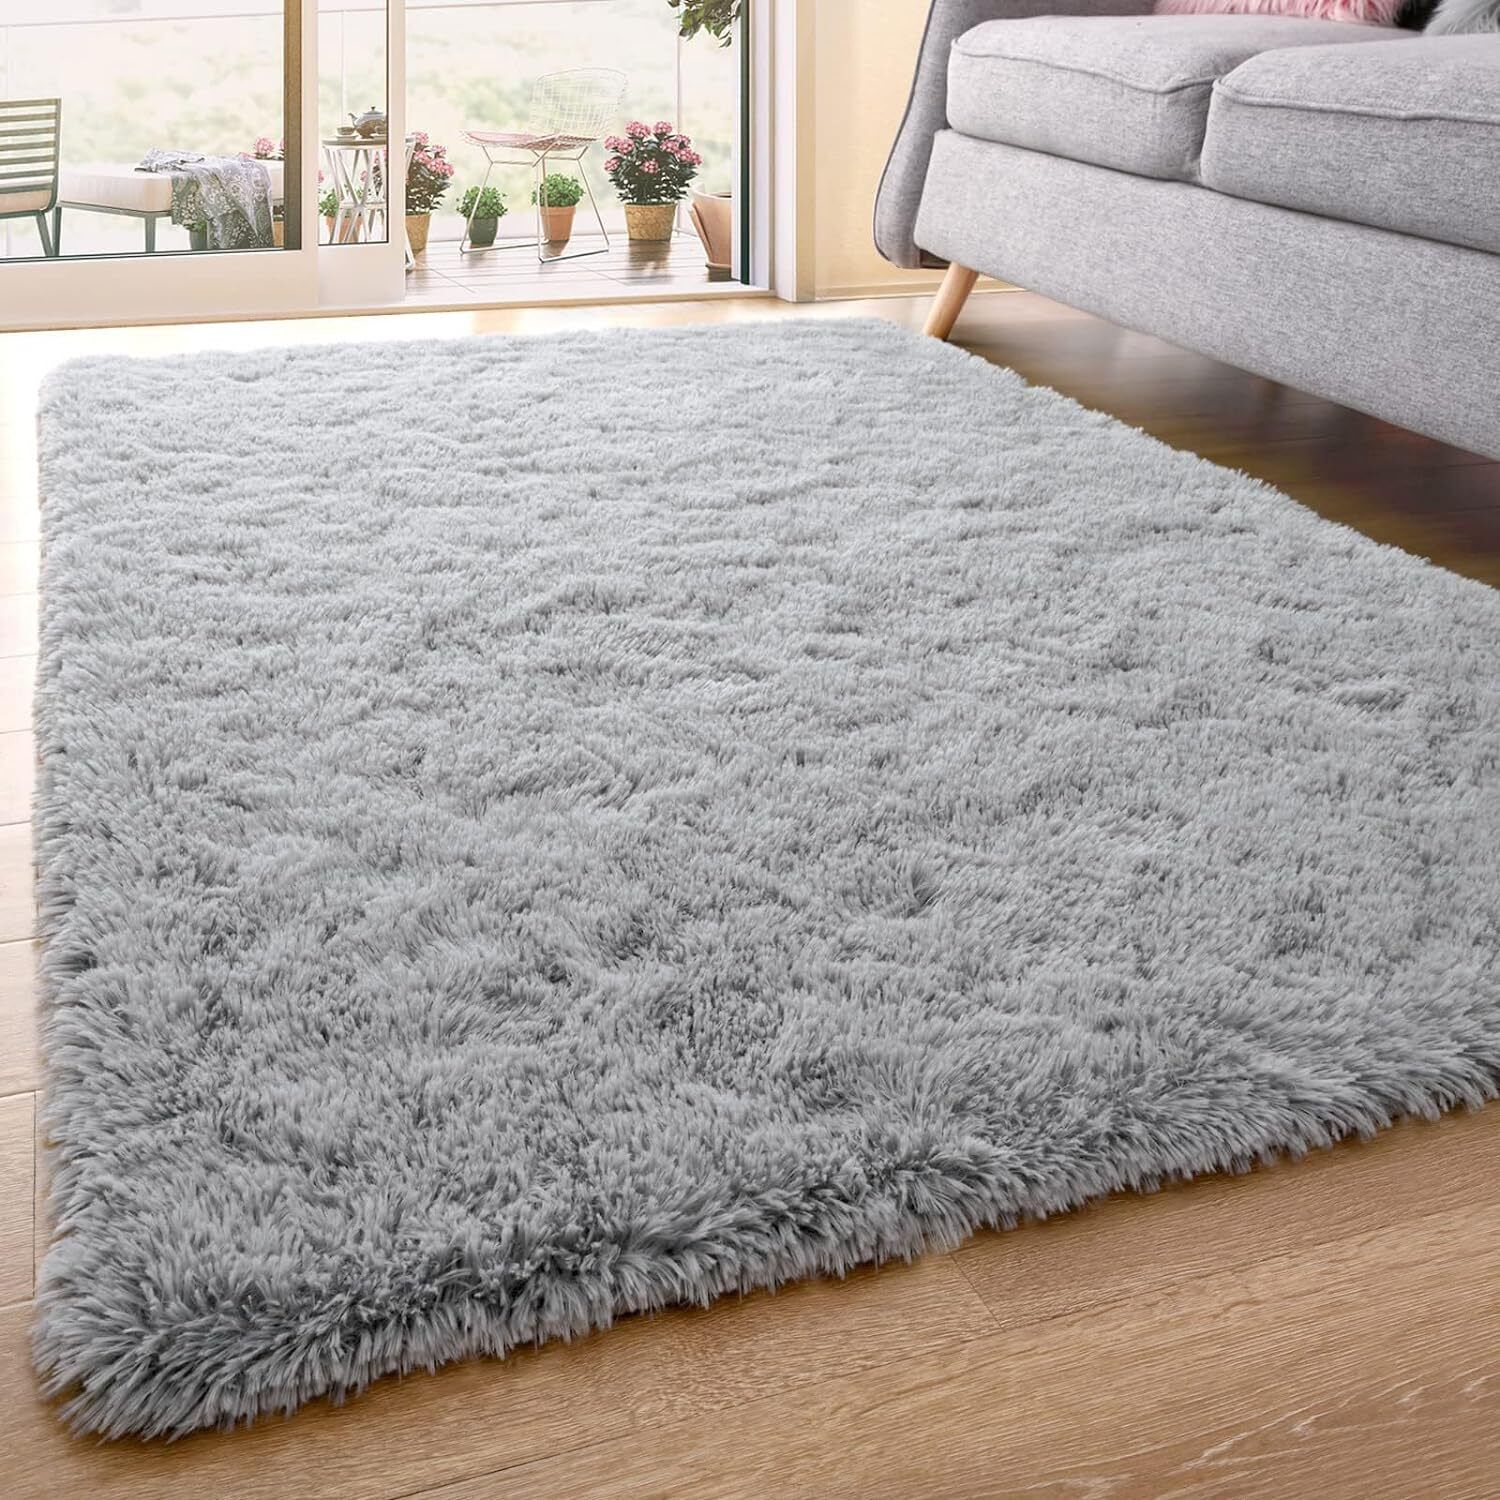 Primary image for Fluffy Carpet for Bedroom 4x6 Rug Soft Indoor Small Shag Area Rug Washable Rugs 